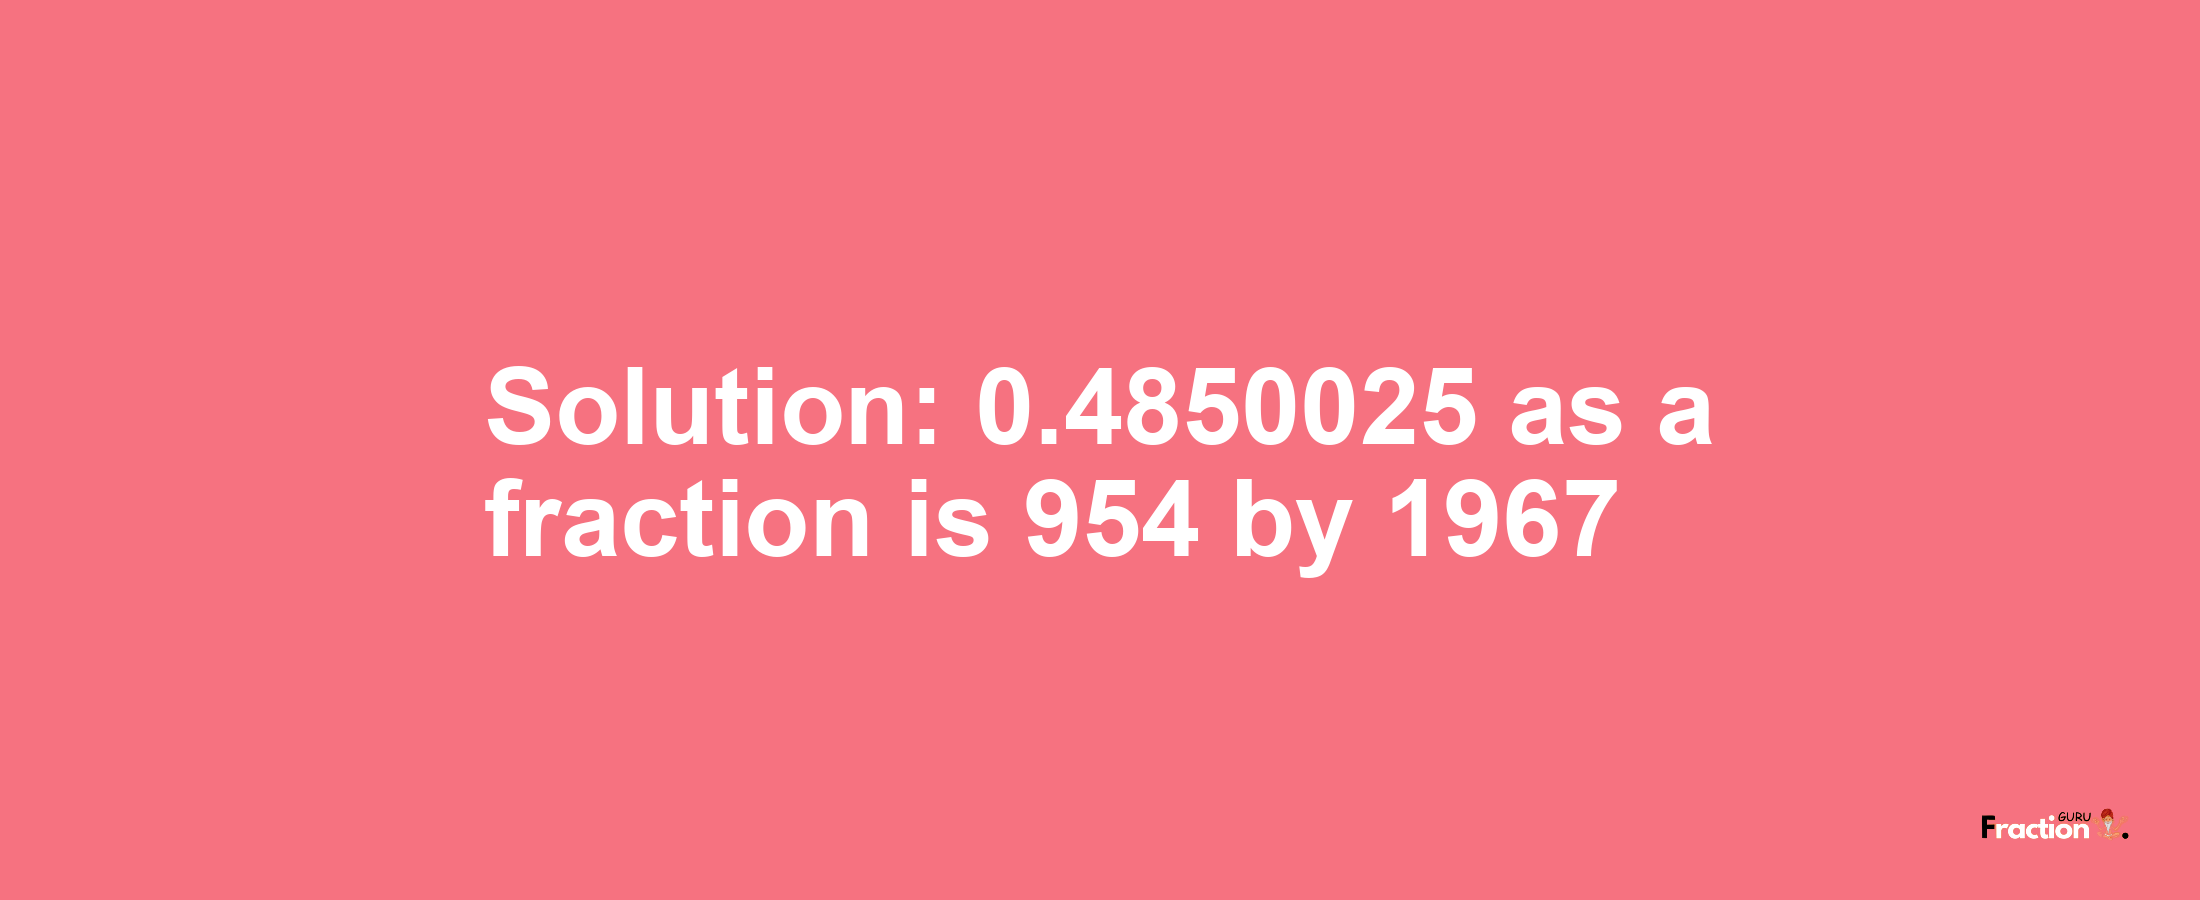 Solution:0.4850025 as a fraction is 954/1967